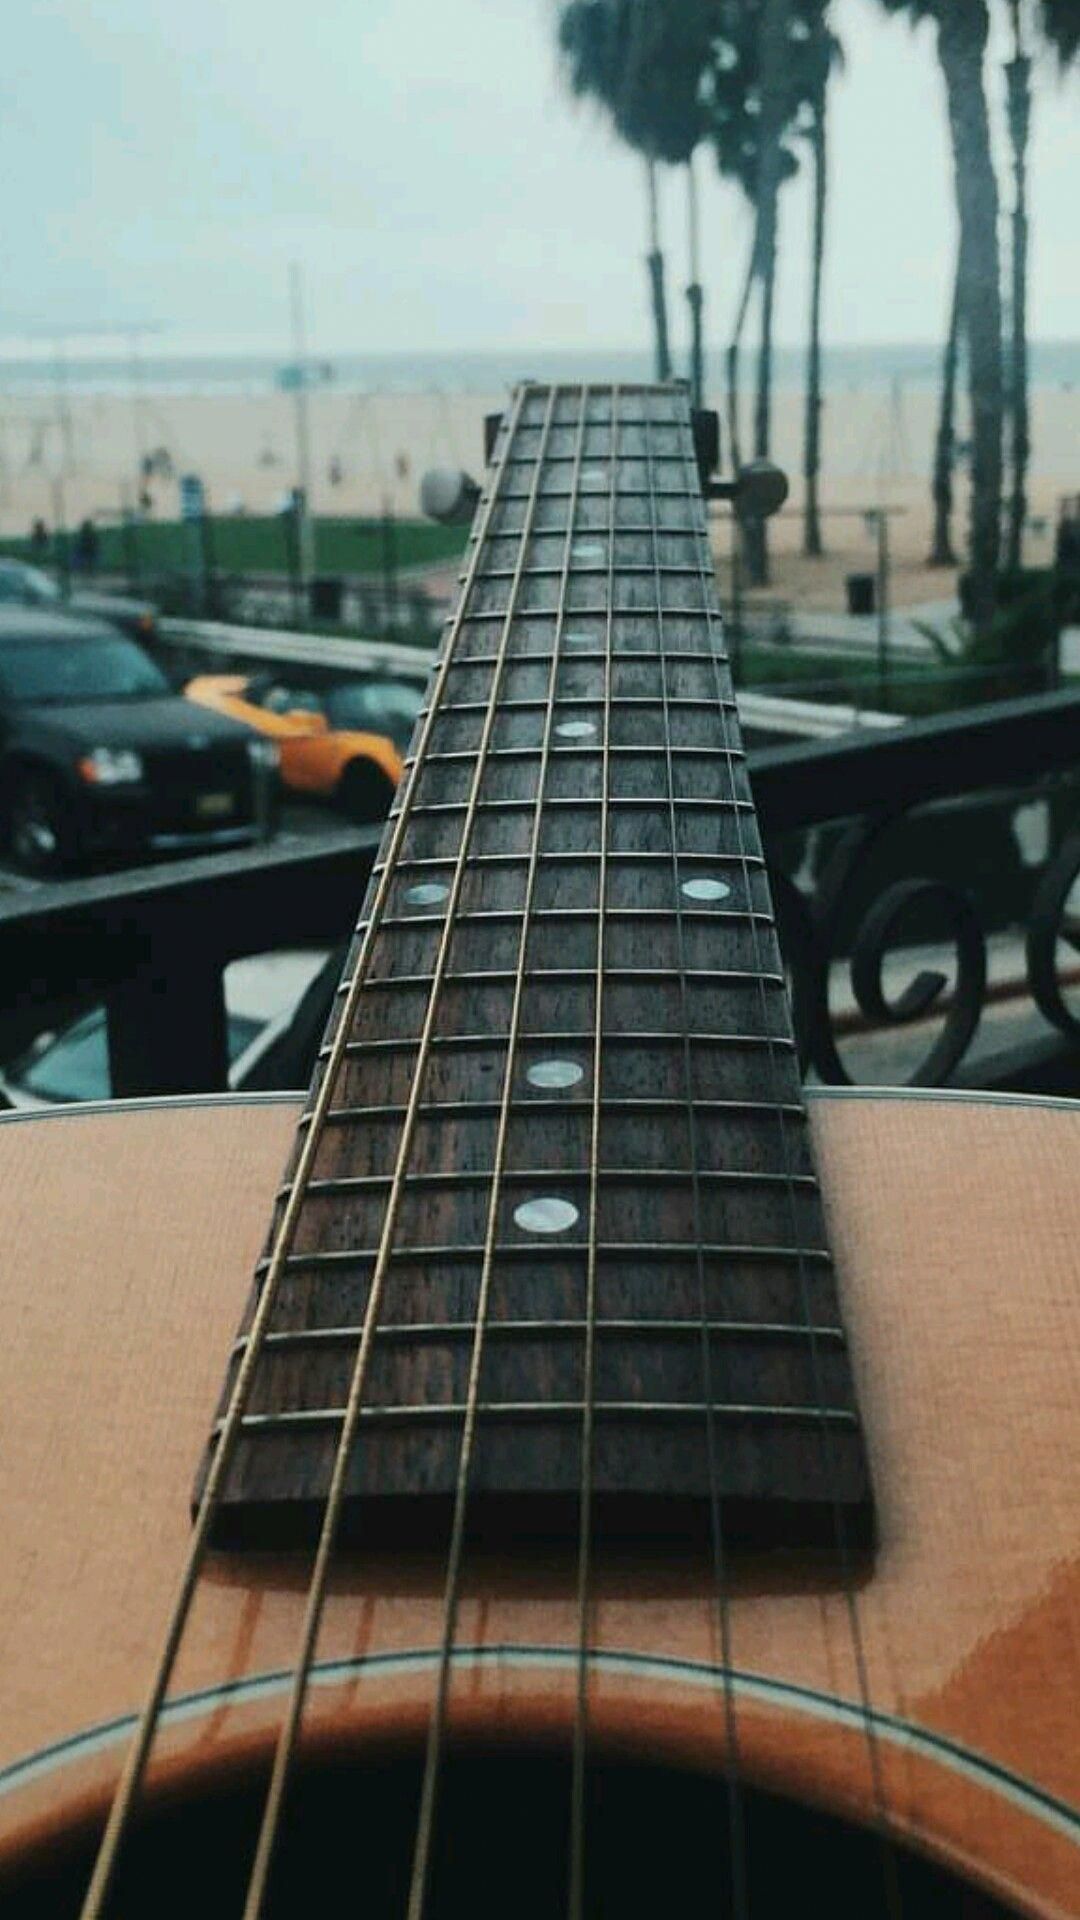 A guitar neck is on the side of an outdoor patio - Guitar